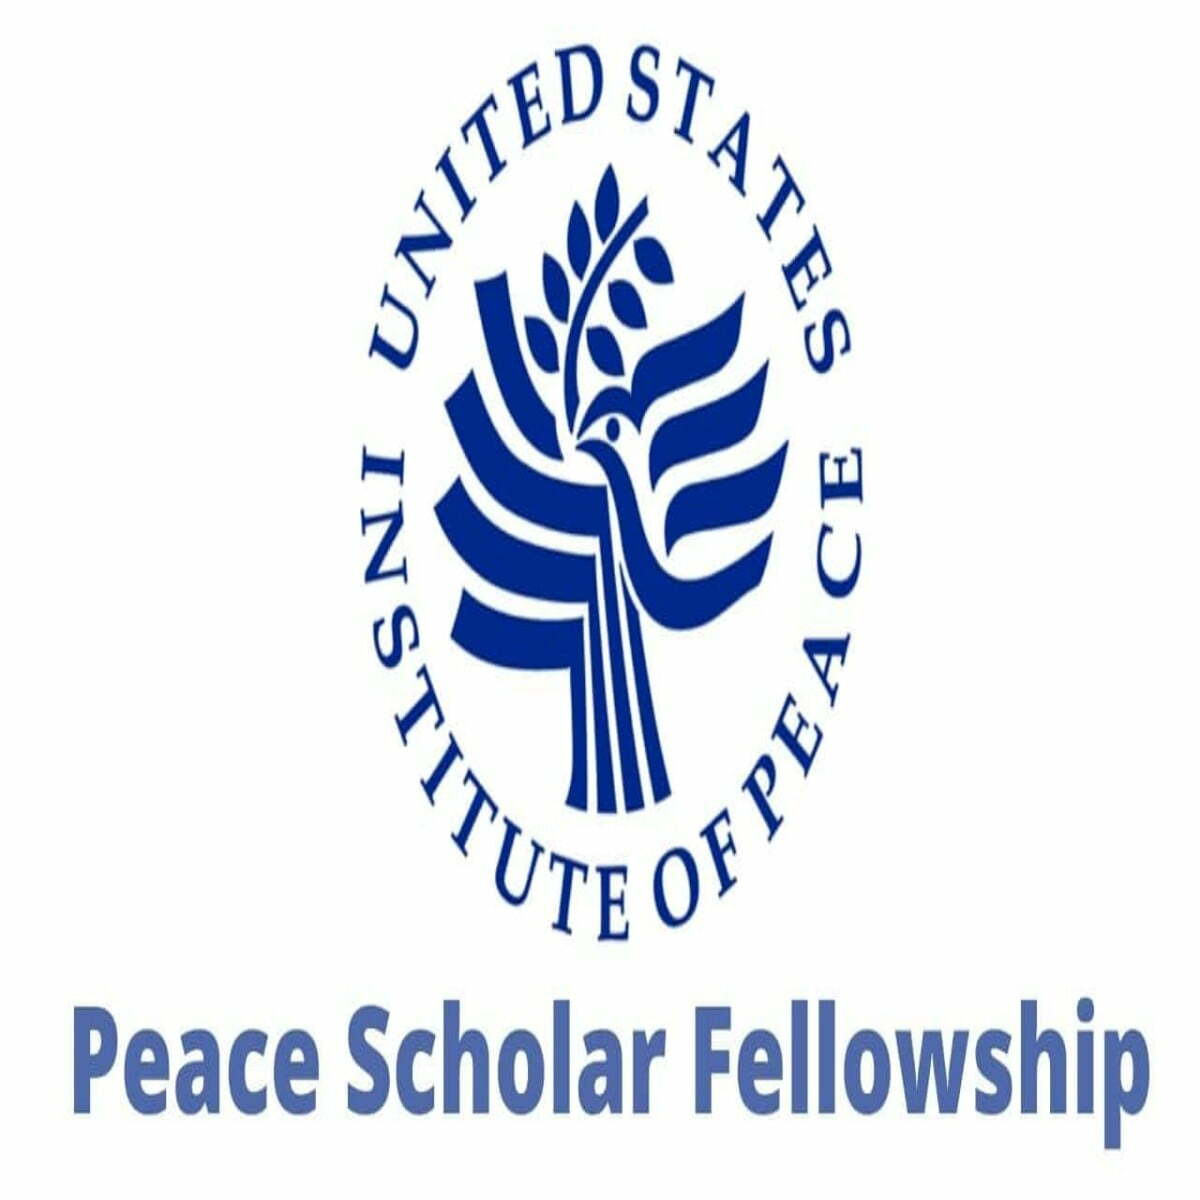 USIP Peace Scholar Fellowship Program in the United States